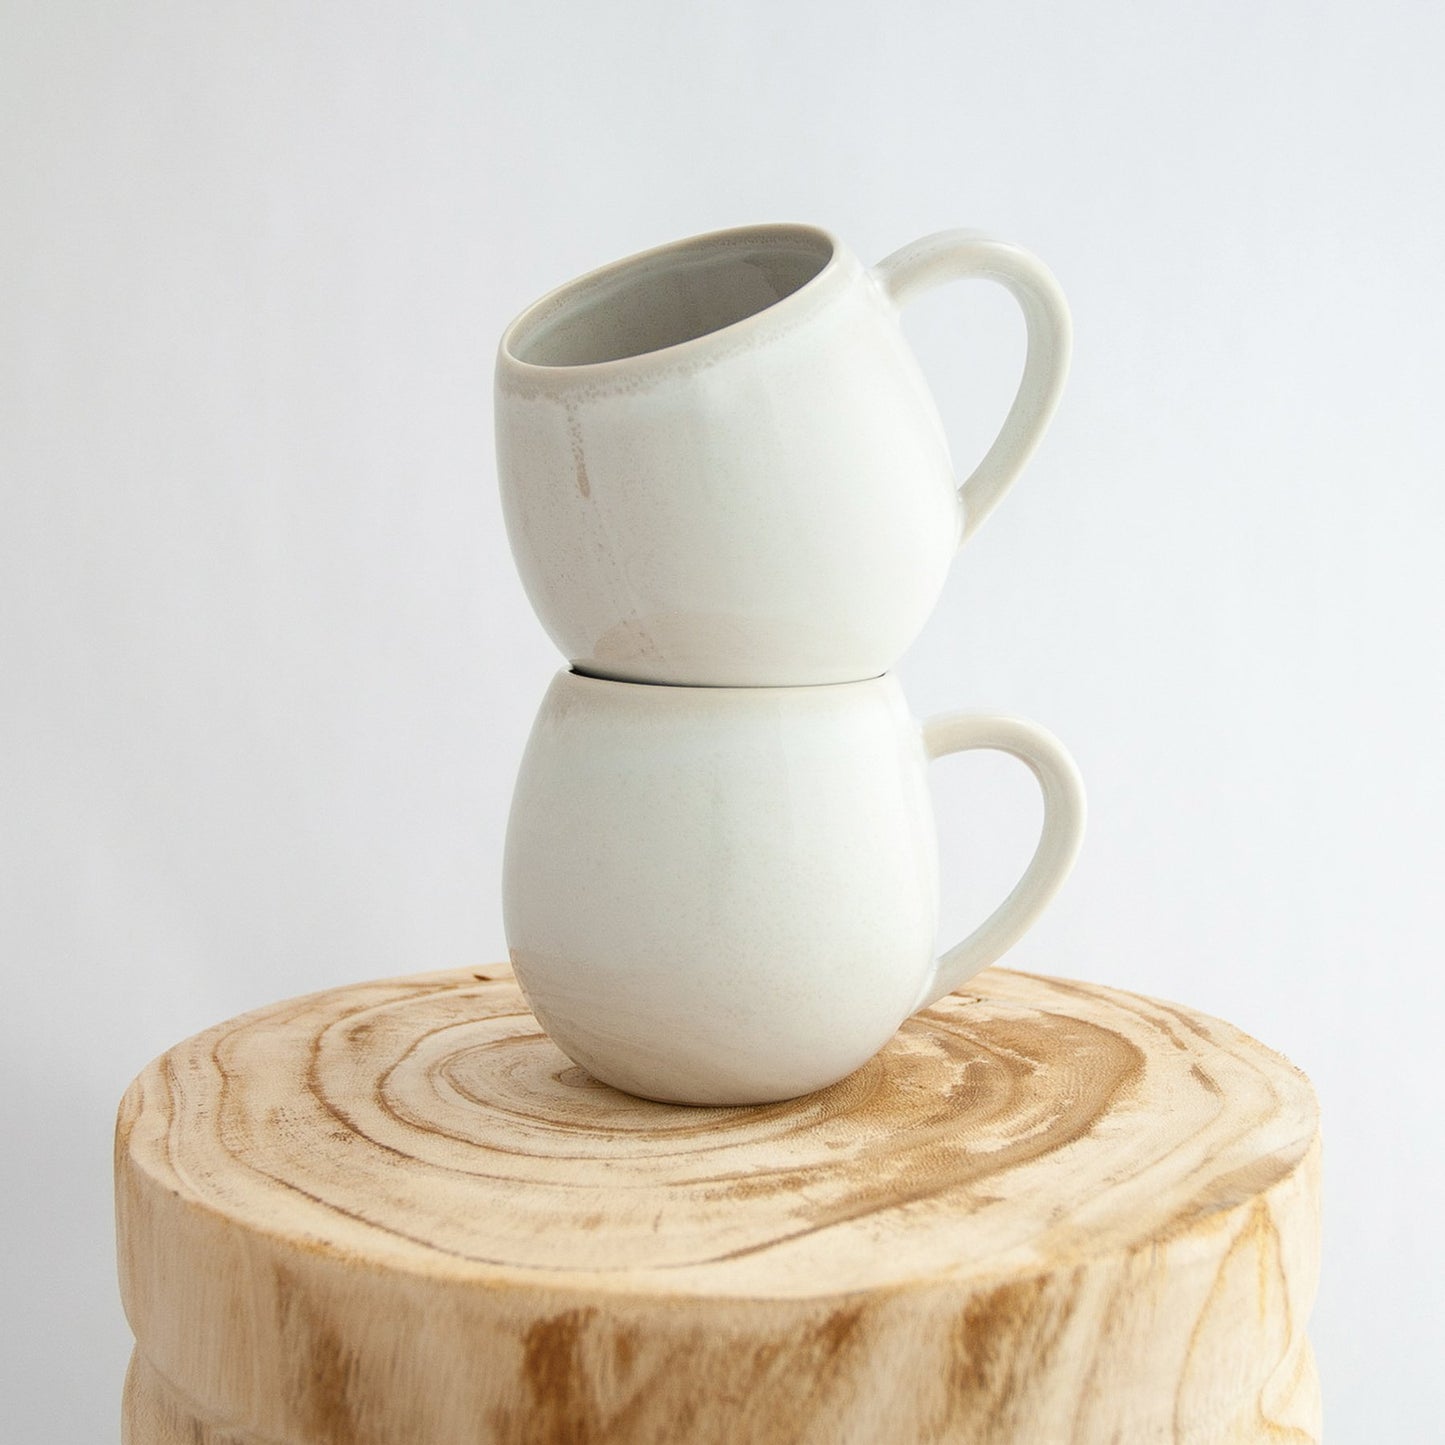 Two Robert Gordon coast white canvas mugs stacked on a natural wooden round side table